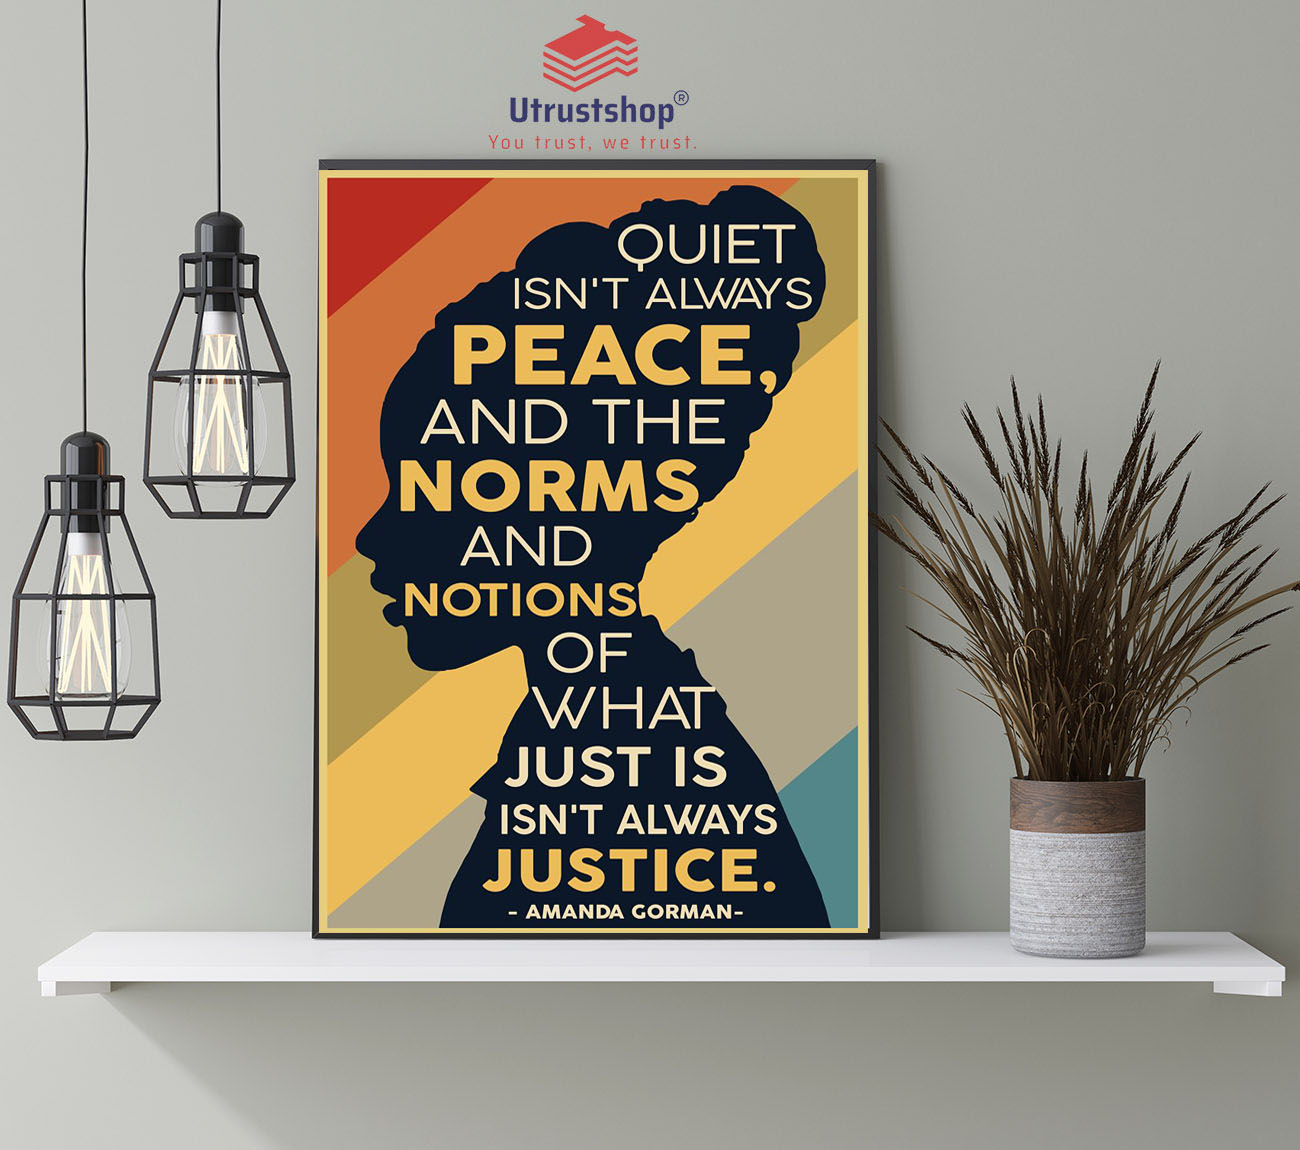 Amanda Gorman Quiet isn't always peace and the norm and notions of what just is isn't always justice poster4